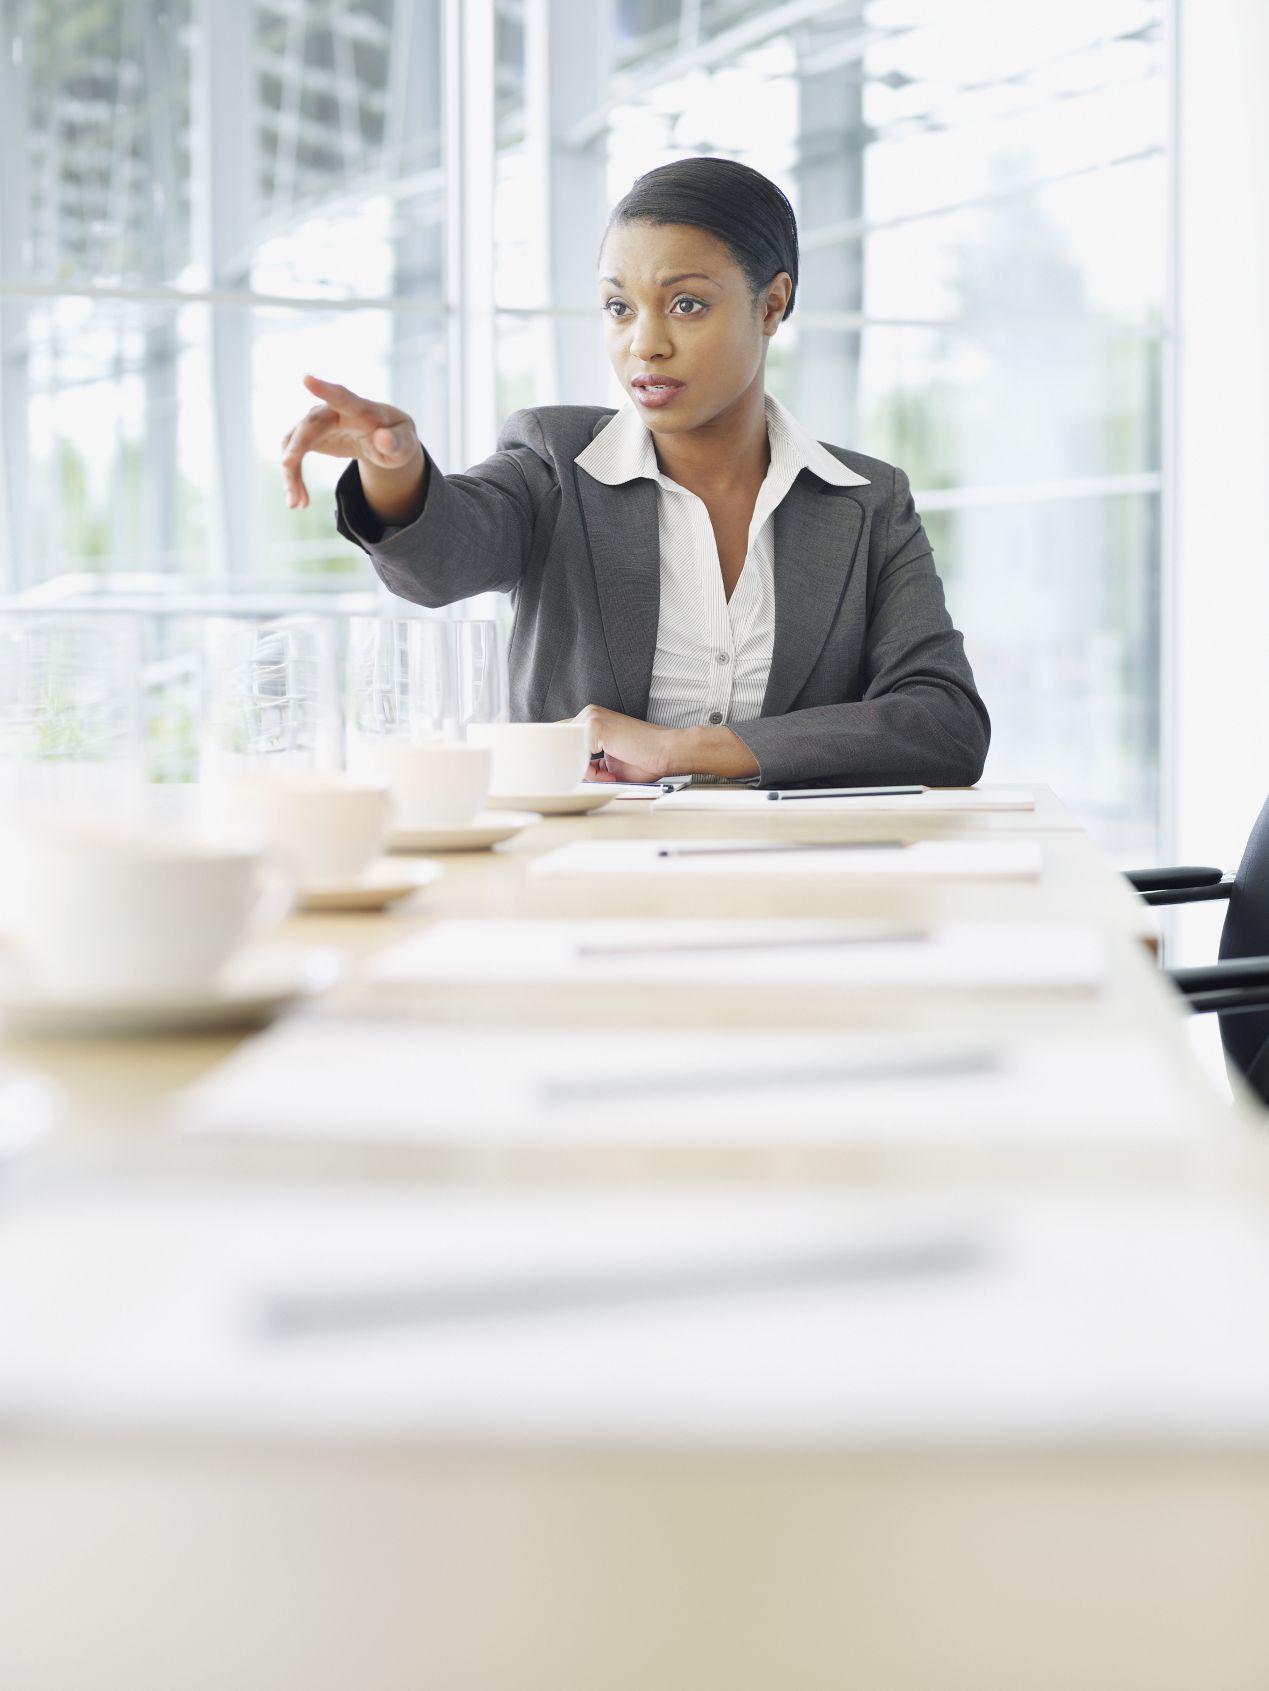 A woman at a conference table points to a colleague.